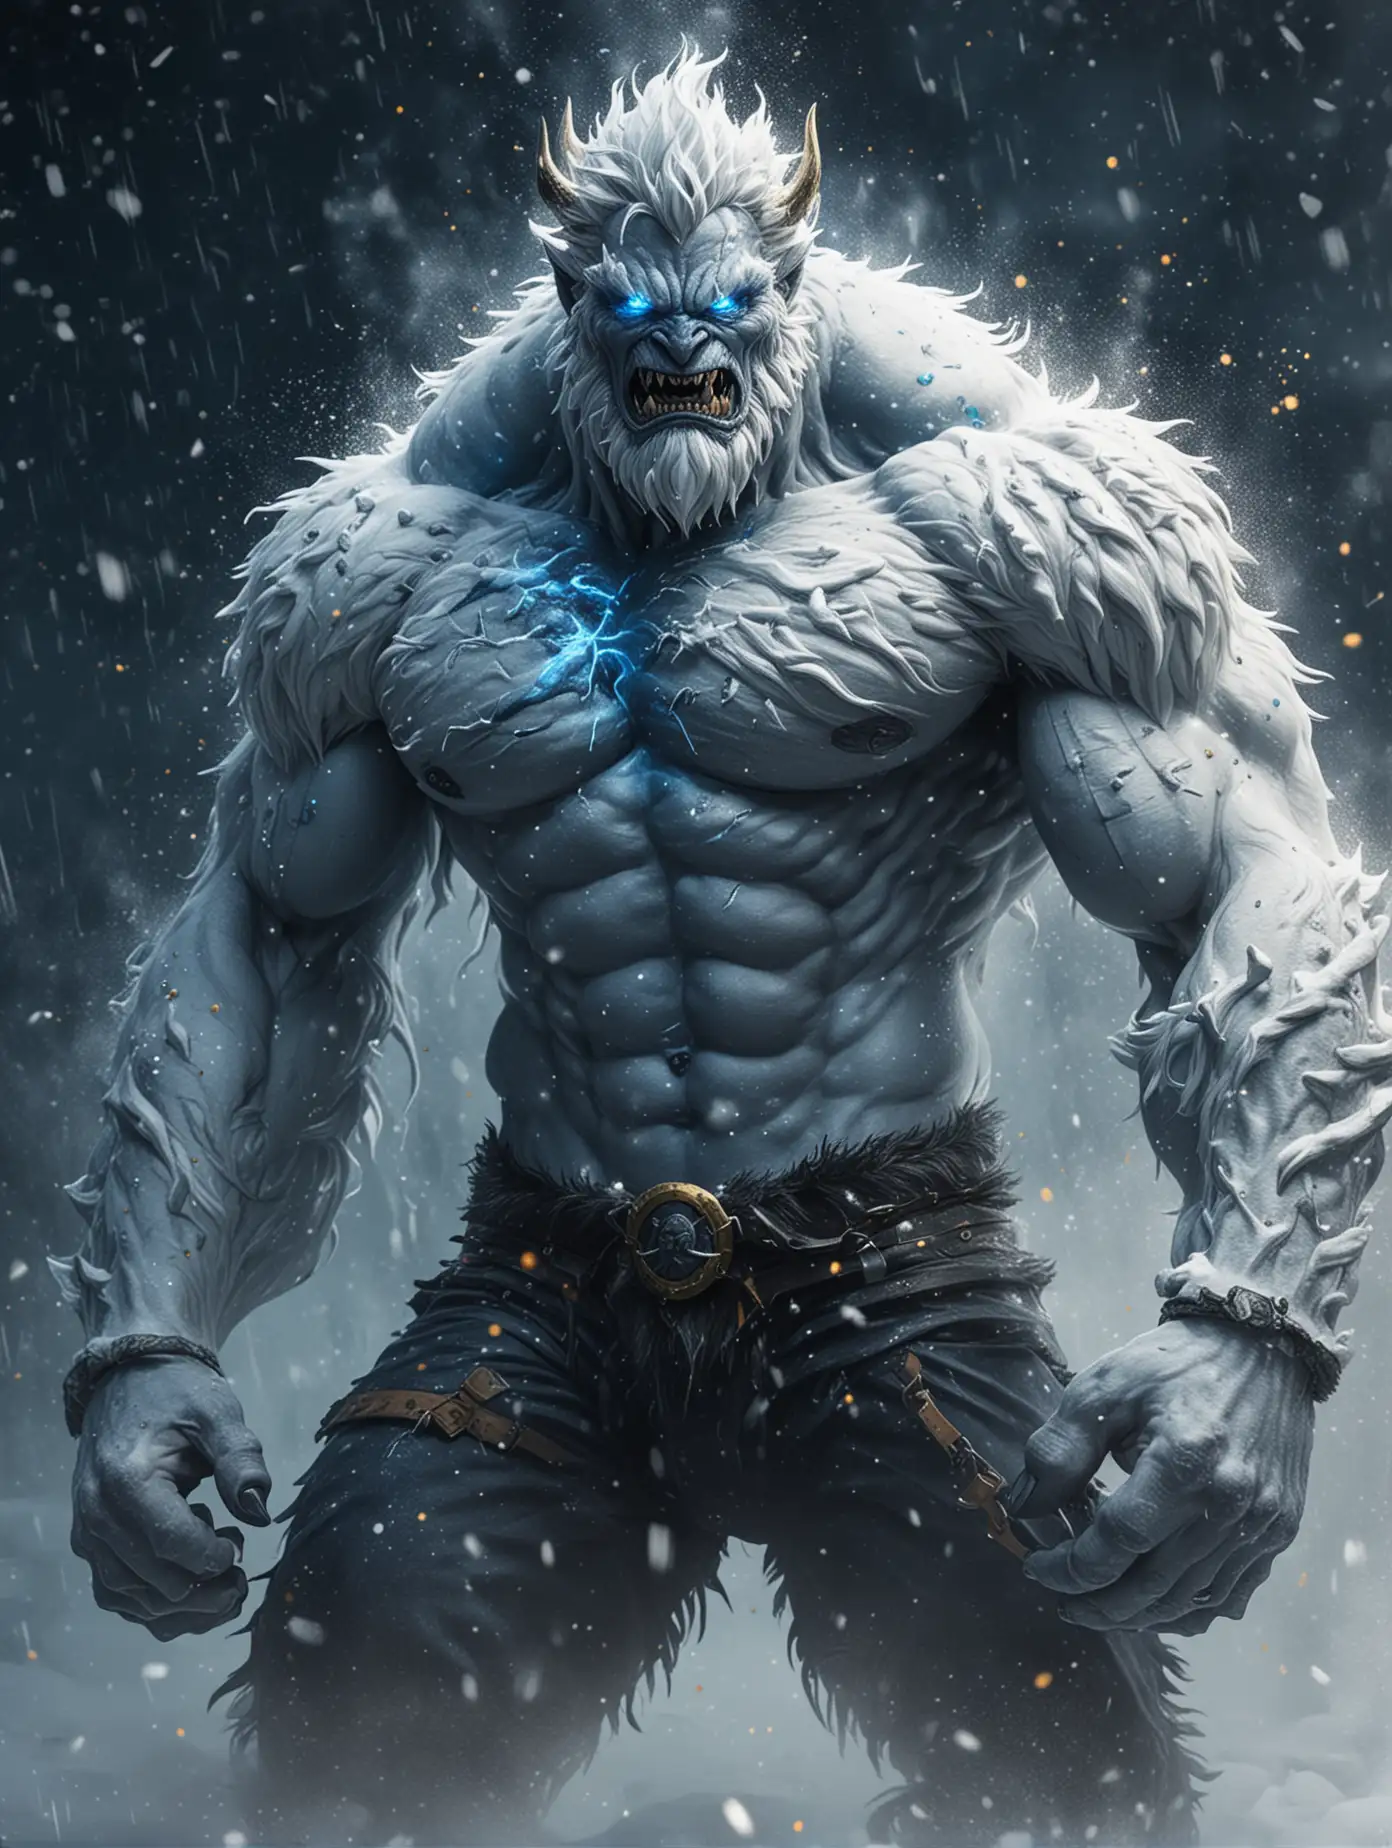 Illustration of a handsome man blizzard snow monster, he is a snow beast, he is shirtless, nice abs, blue and black fog, navy flames, gold sparks, 